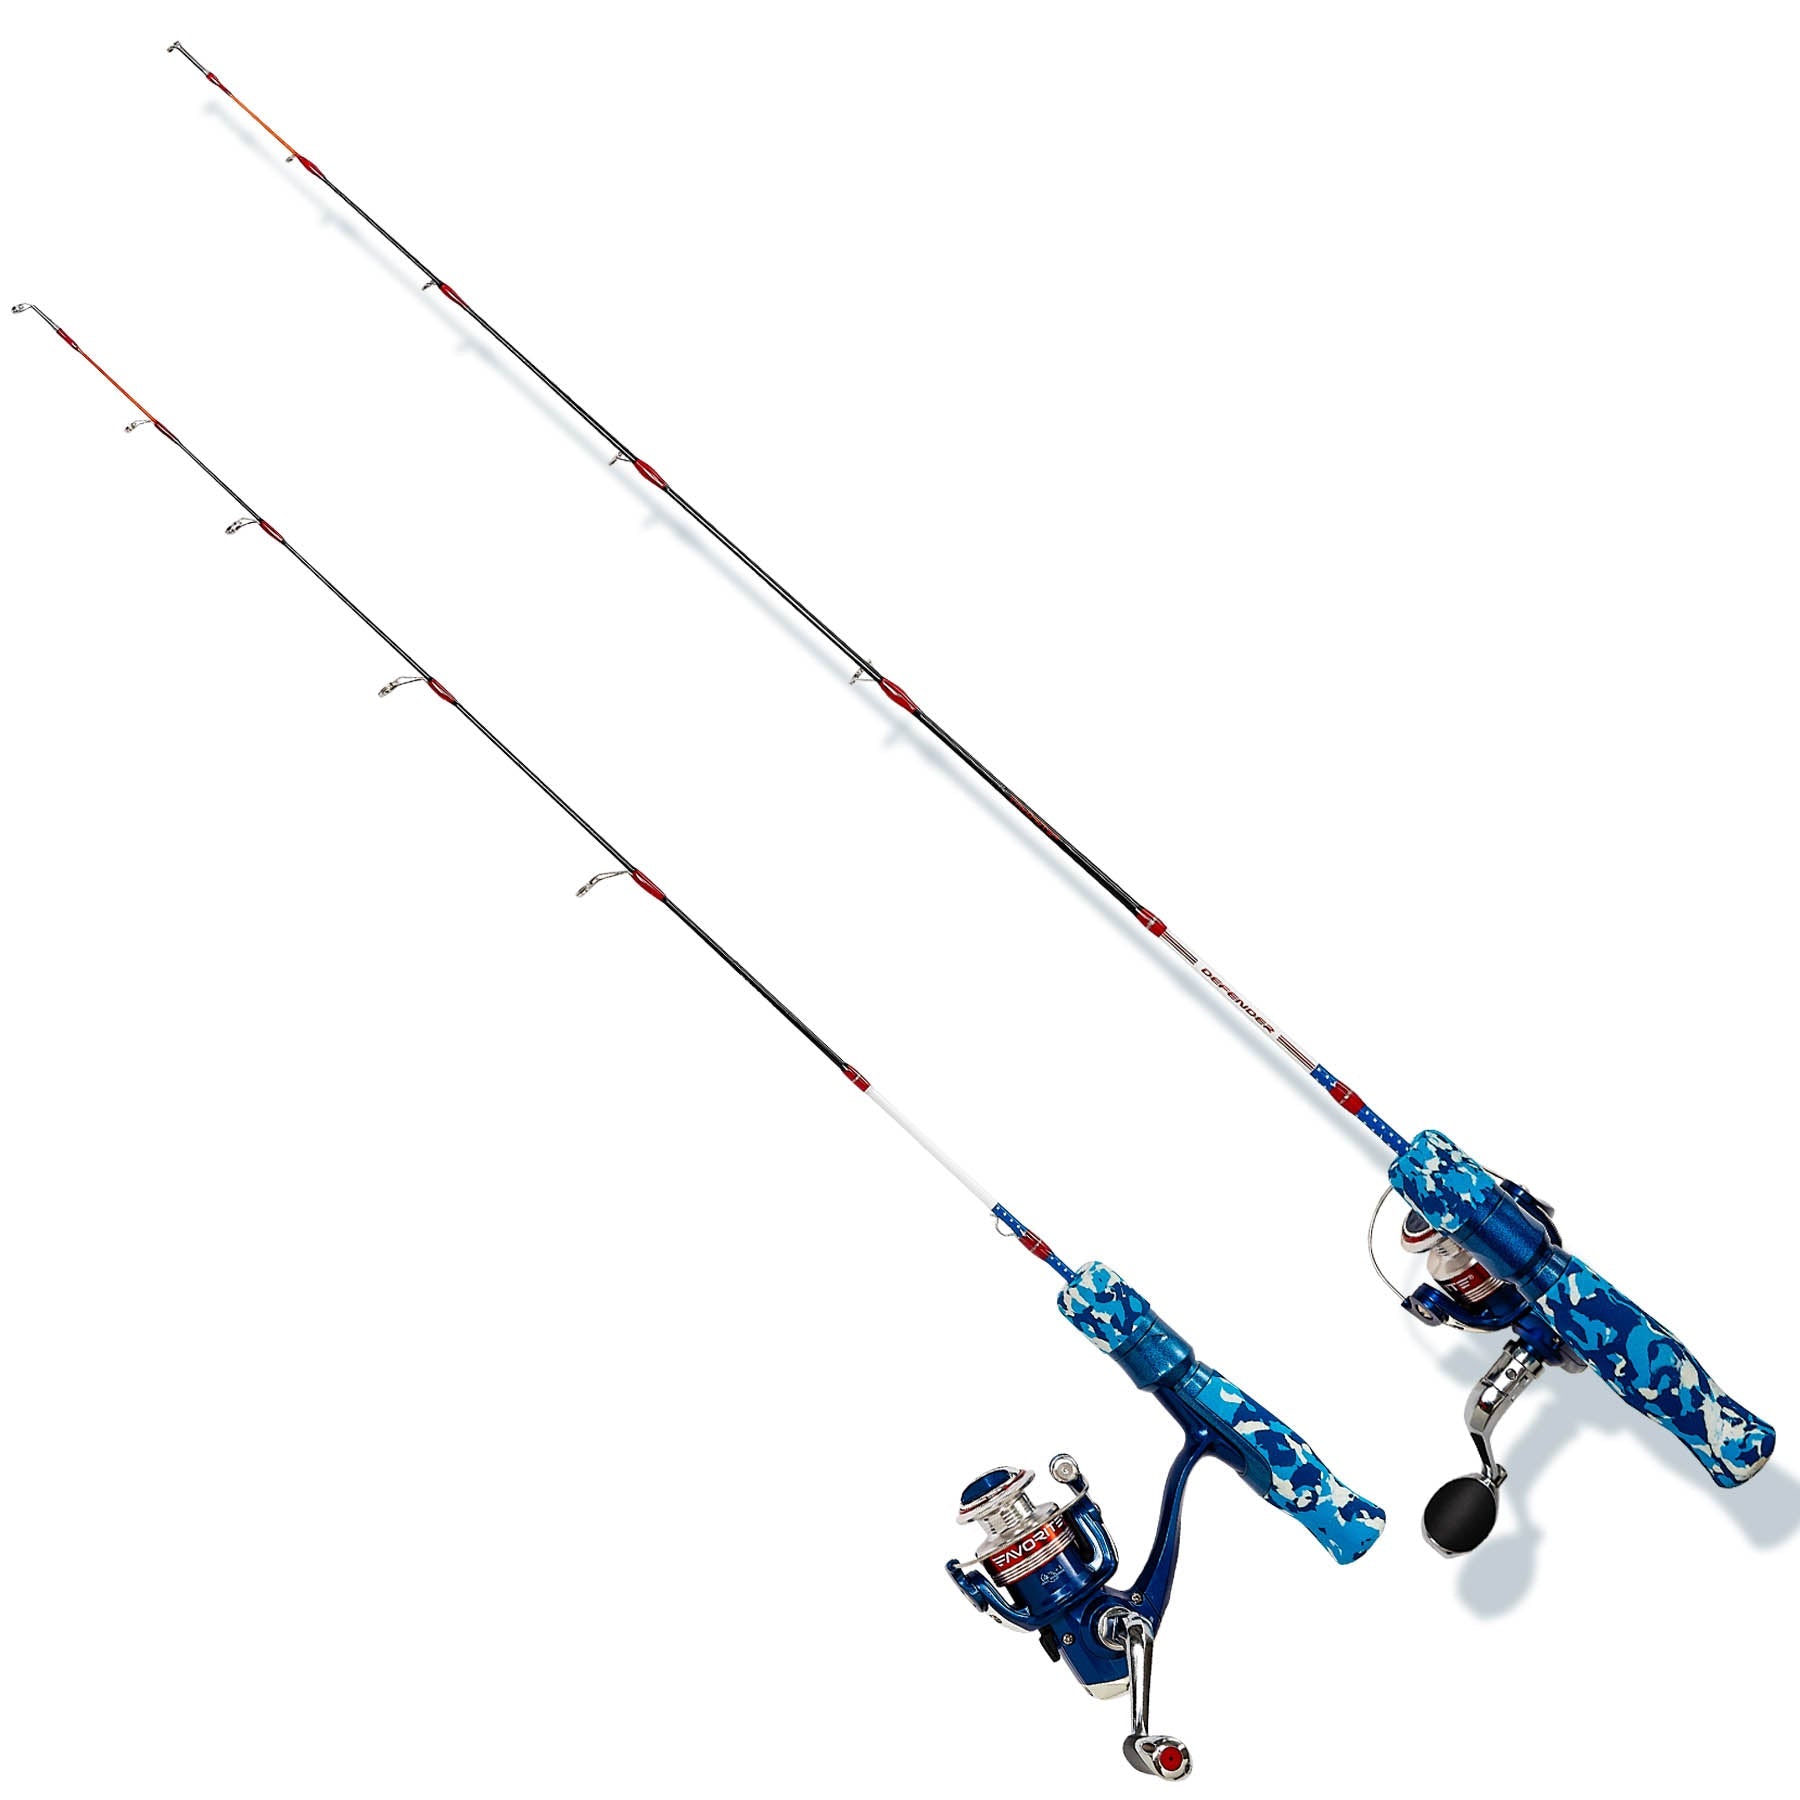 Explore our wide range of ice fishing accessories designed to keep